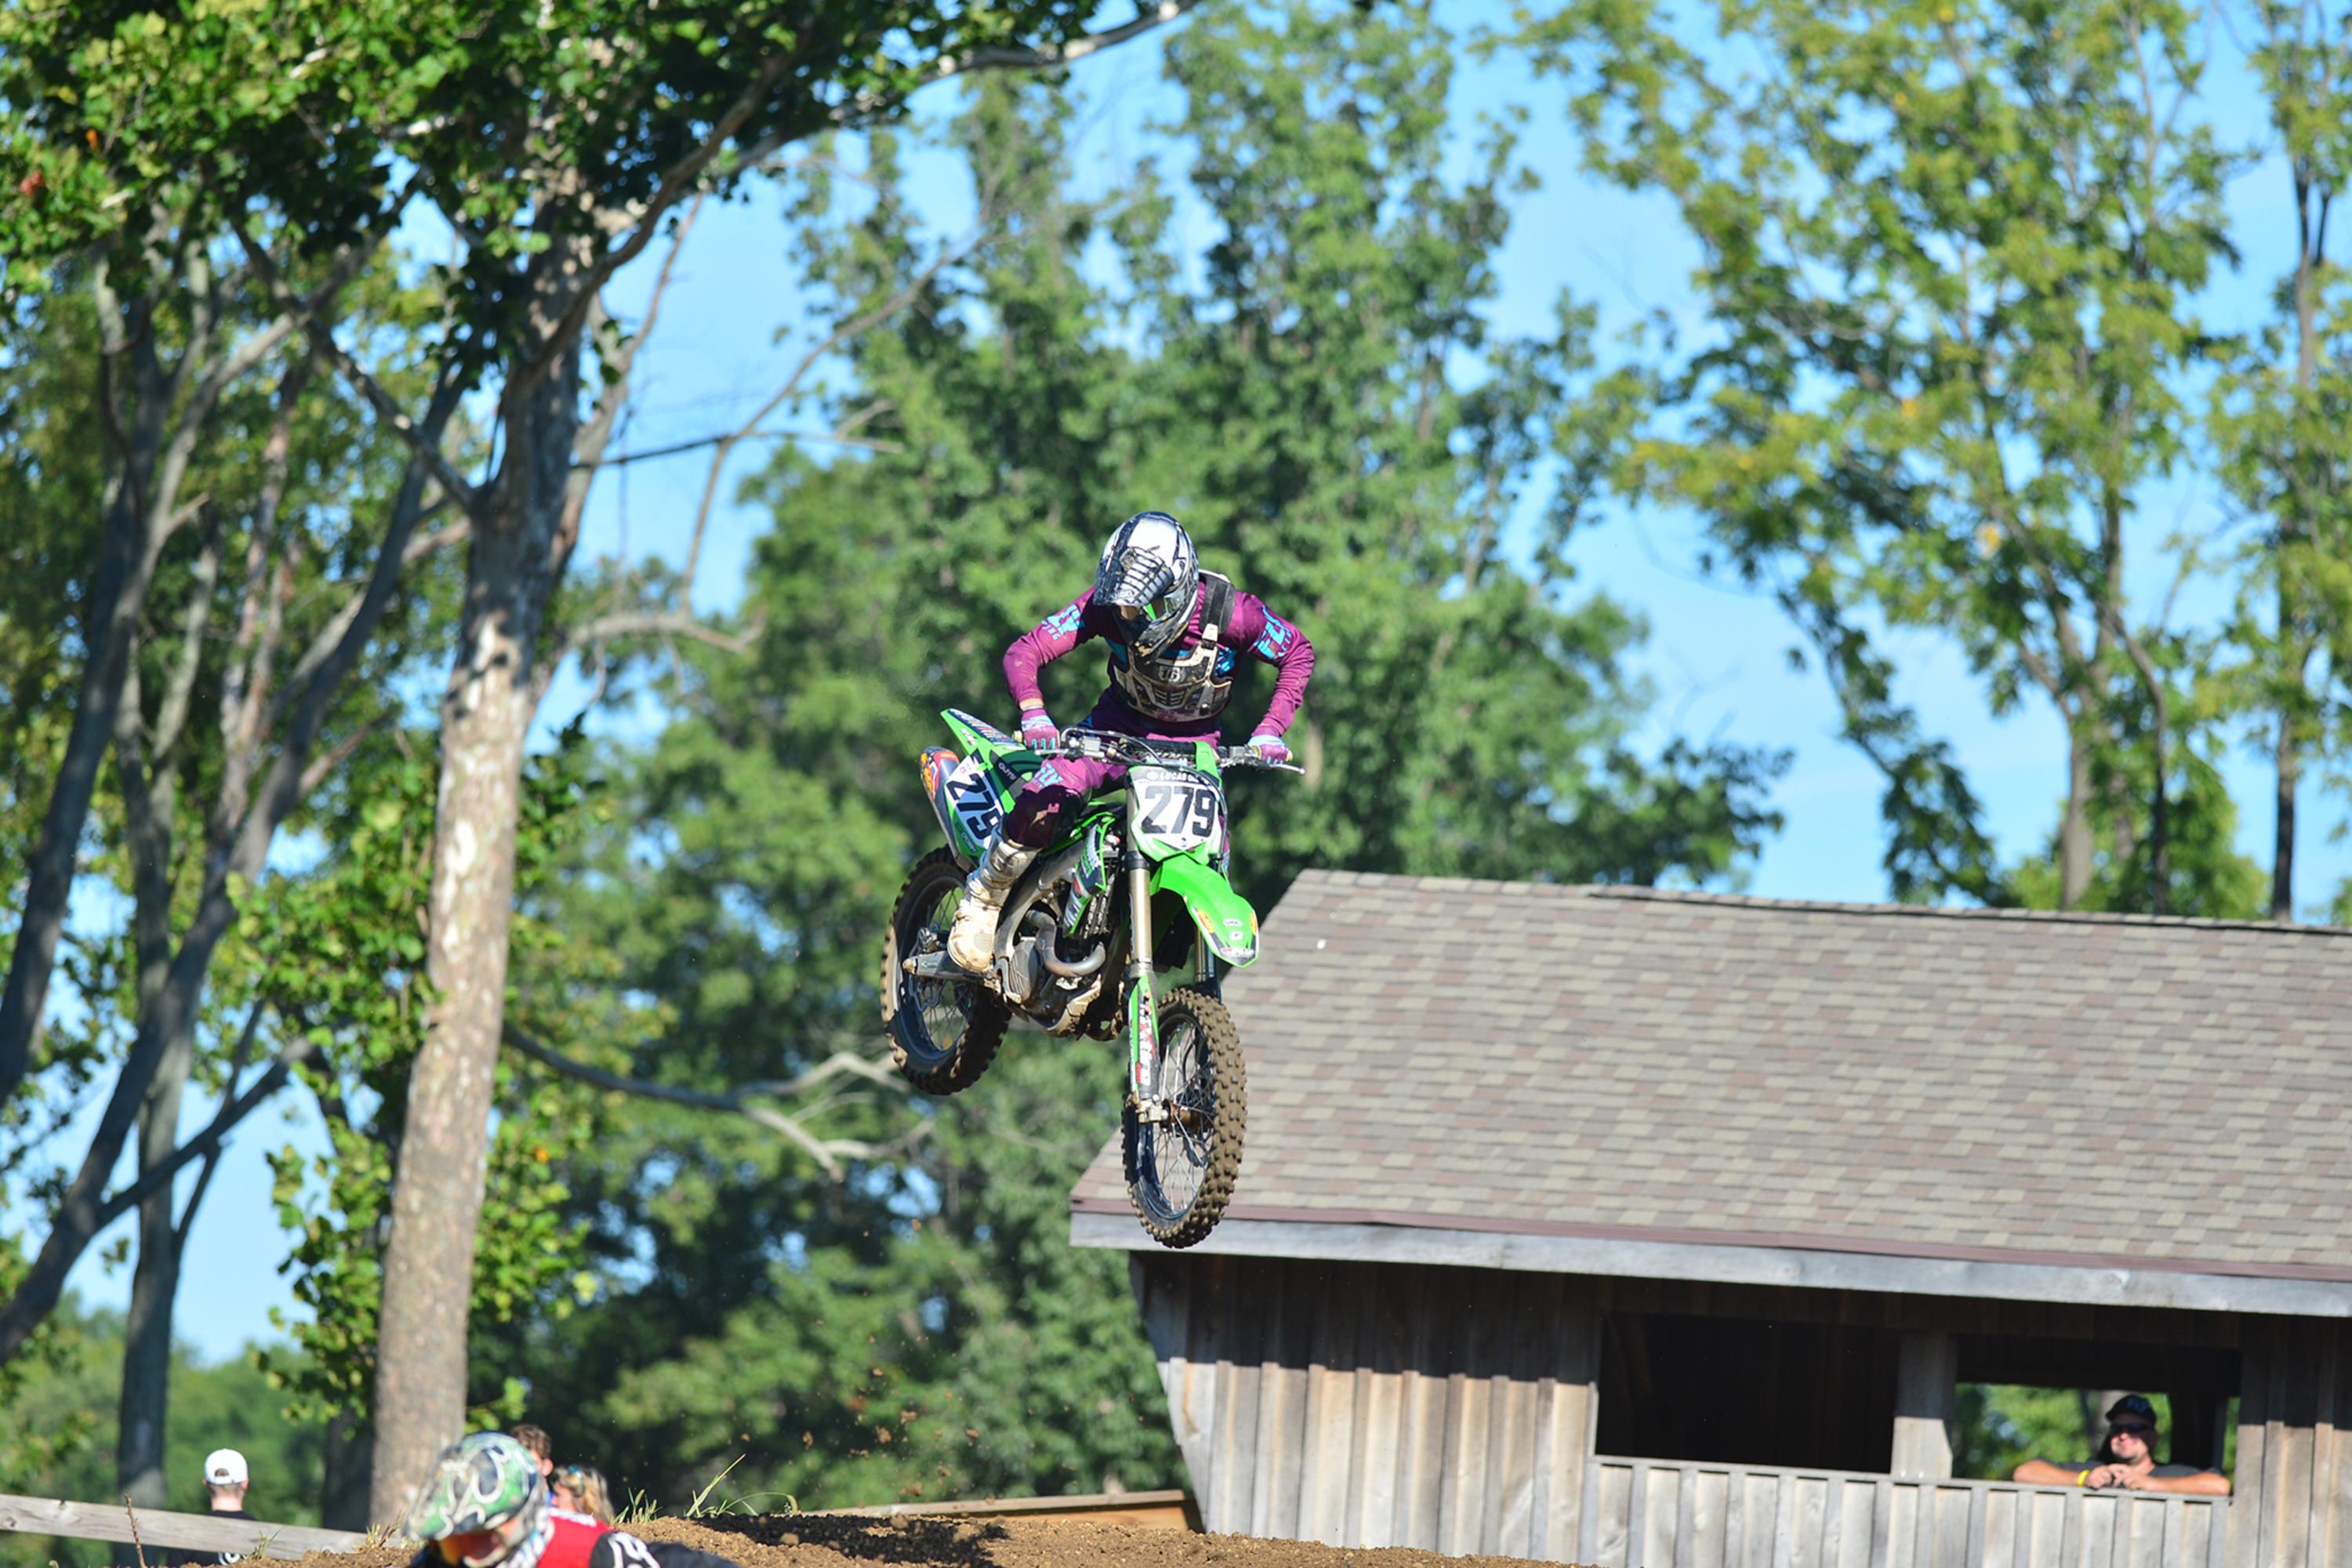 Amateur Racers Shine at The guaranteed Rate Ironman Amateur MX Days in Indiana